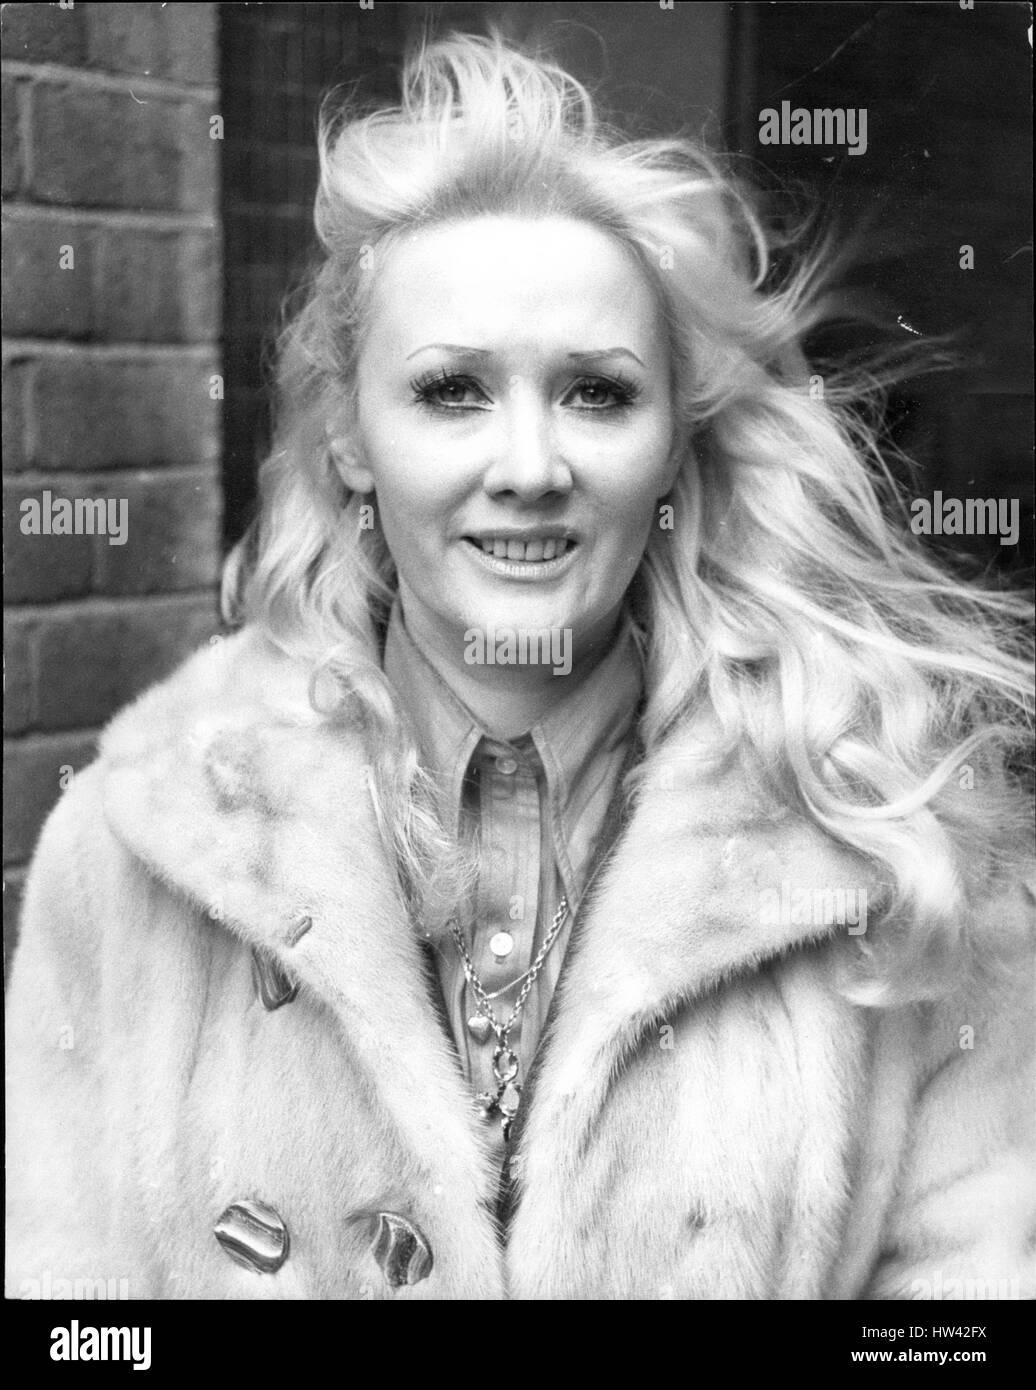 May 05, 1973 - ''Bribery at BBC'' - 15 arrested: The famous singer Dorothy Squires was arrested today in connection with allegations that BBC producers were bribed broadcast pop records. Warrants were issued for the detention of 14 other people, including Janie Jones, West End hostess and former model. Photo Shows West End hostess and former model Janie Jones. (Credit Image: © Keystone Press Agency/Keystone USA via ZUMAPRESS.com) Stock Photo